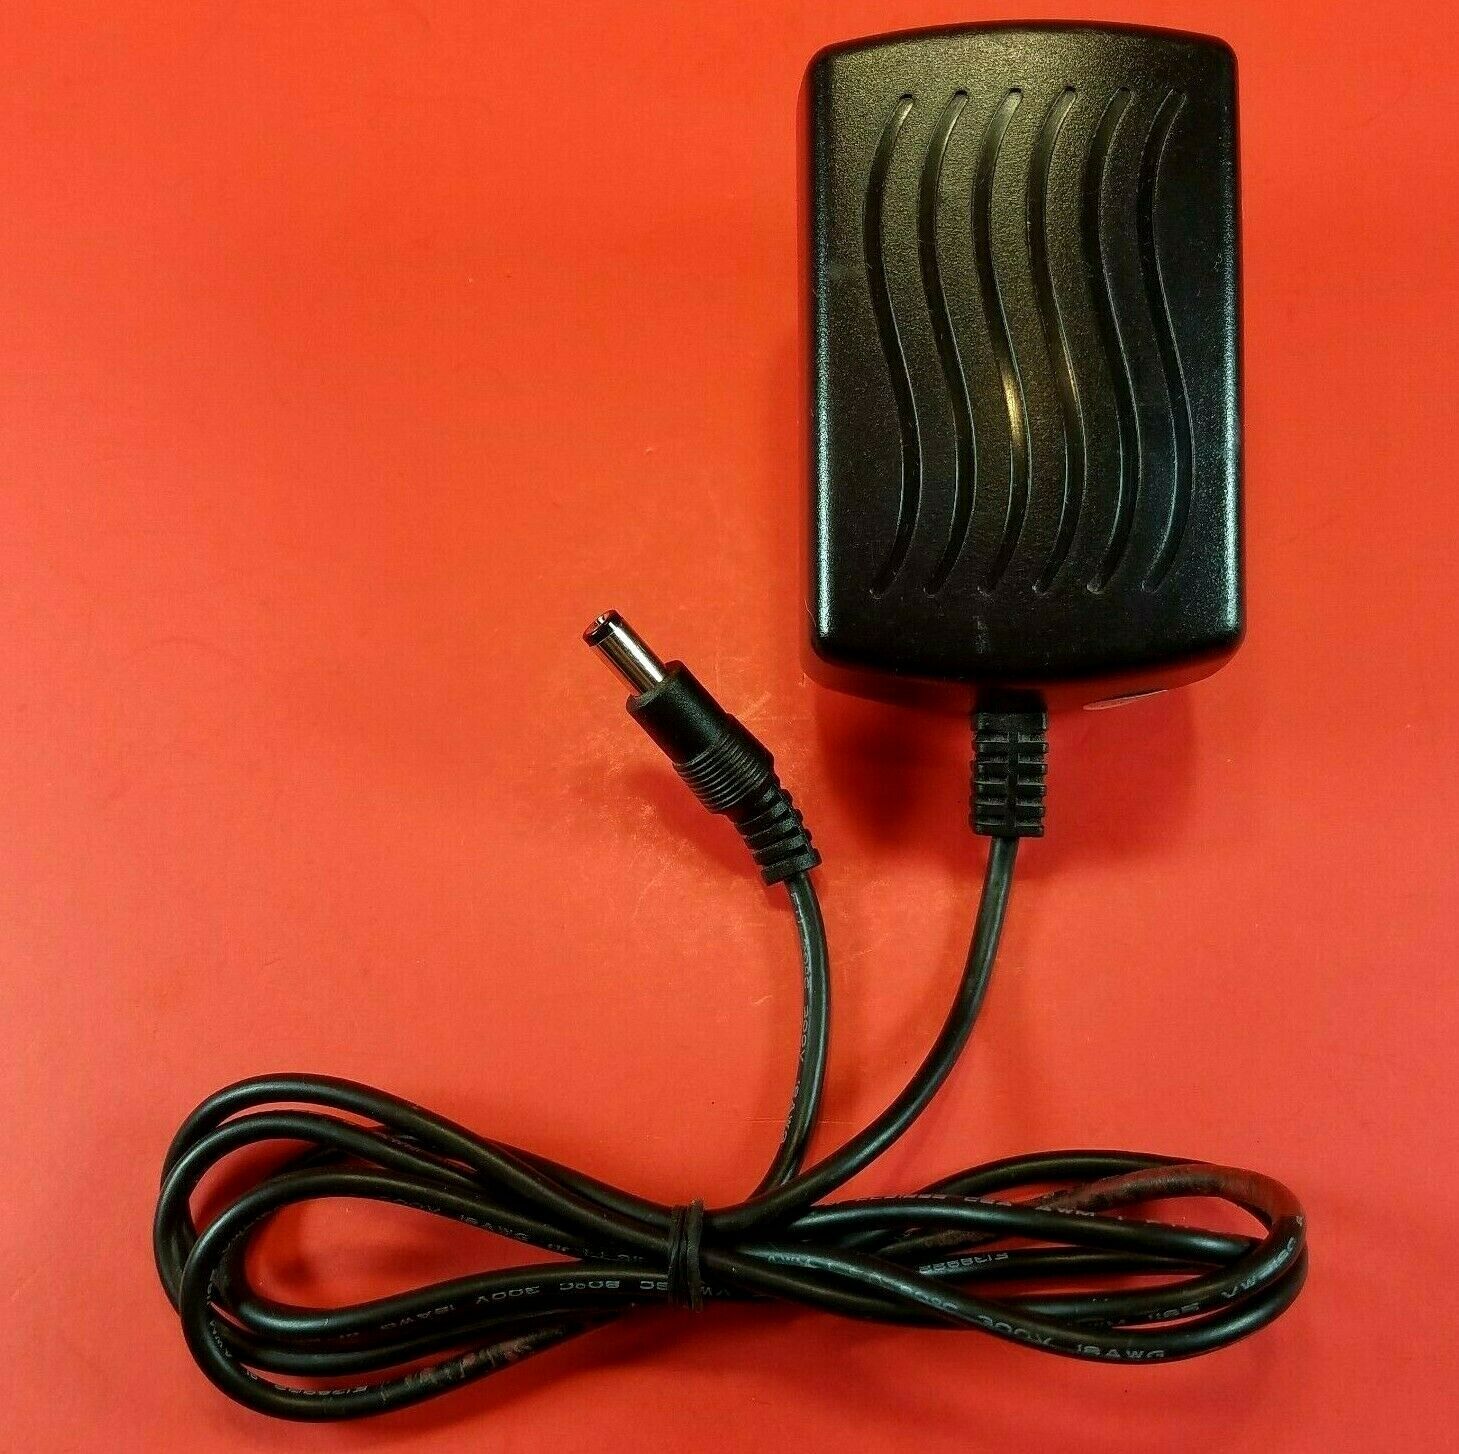 AC Adapter Model: SPS24-12.0-2000 Power Supply Adaptor 12V DC 2000mA OEM Charger Type: AC Adapter Output Voltage: 12 V - Click Image to Close